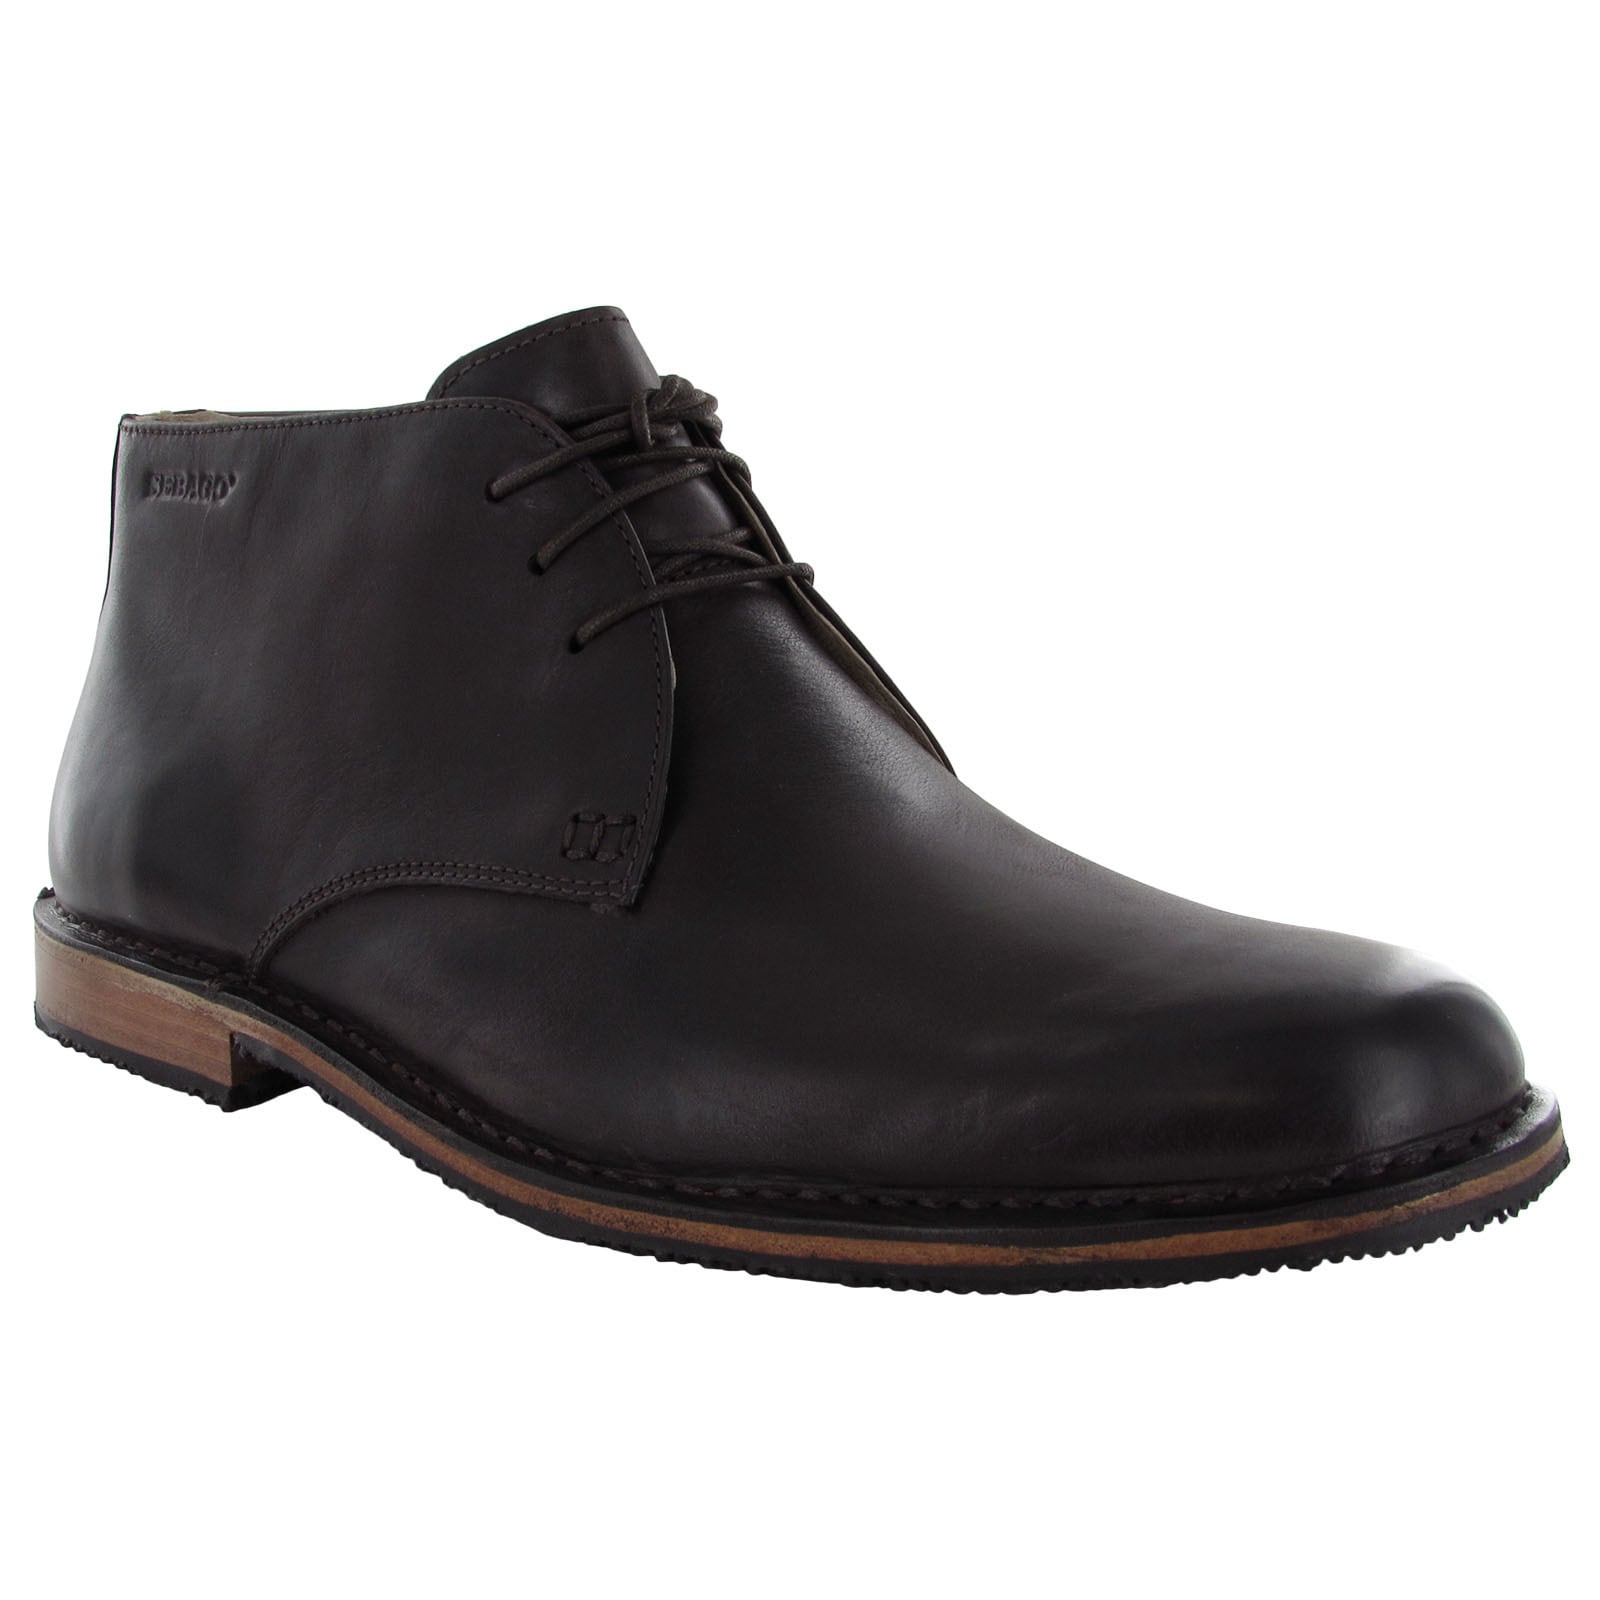 Mens Tremont Full Grain Leather Boots Today $116.99